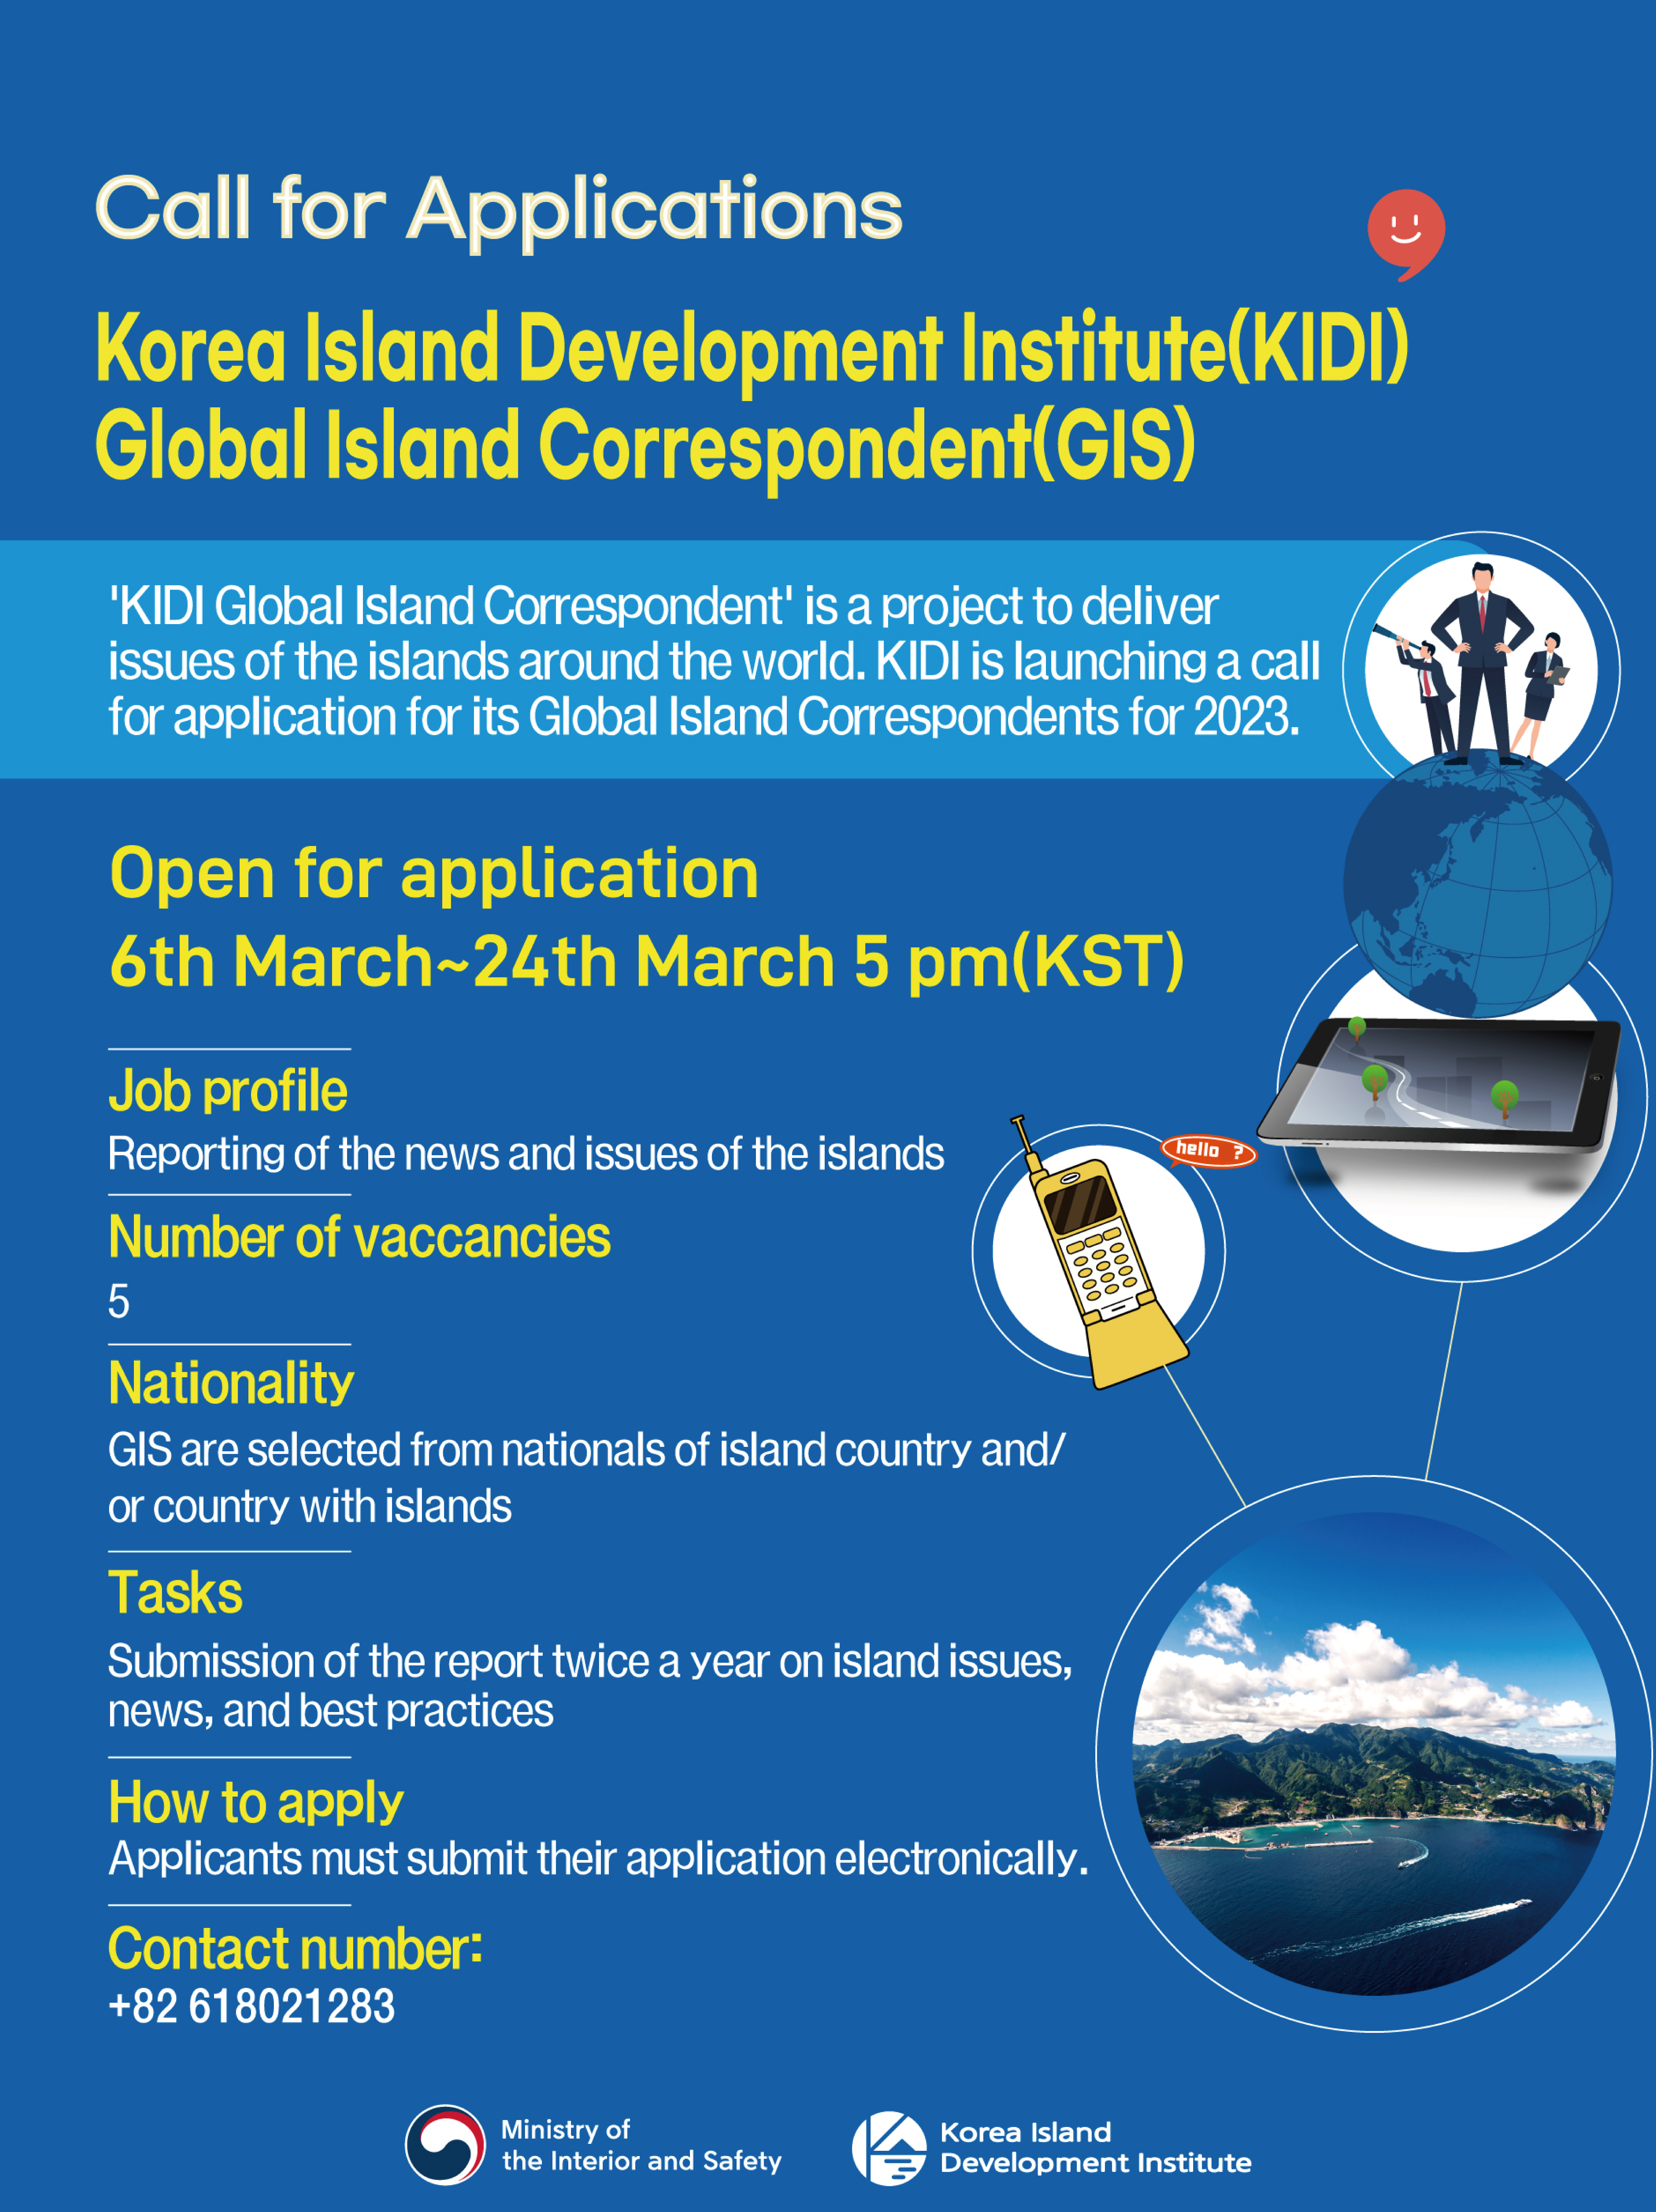 Call for Applications Korea Island Development Institute(KIDI) Global Island Correspondent(GIS) : 'KIDI Global Island Correspondent' is a project to deliver issues of the islands around the world. KIDI is launching a call for application for its Global Island Correspondents for 2023. | Open for application : 6th March ~ 24th March 5 pm(KST) | Job profile : Reportion of the news and issues of the islands | Number of vaccancies : 5 | Nationality : GIS are selected from nationals of island country and/or country with islands | Tasks : Submission of the report twice a year on island issues, news, and best practices | How the apply : Applicants must submit their application electronically. | Contact number : +82 618021283